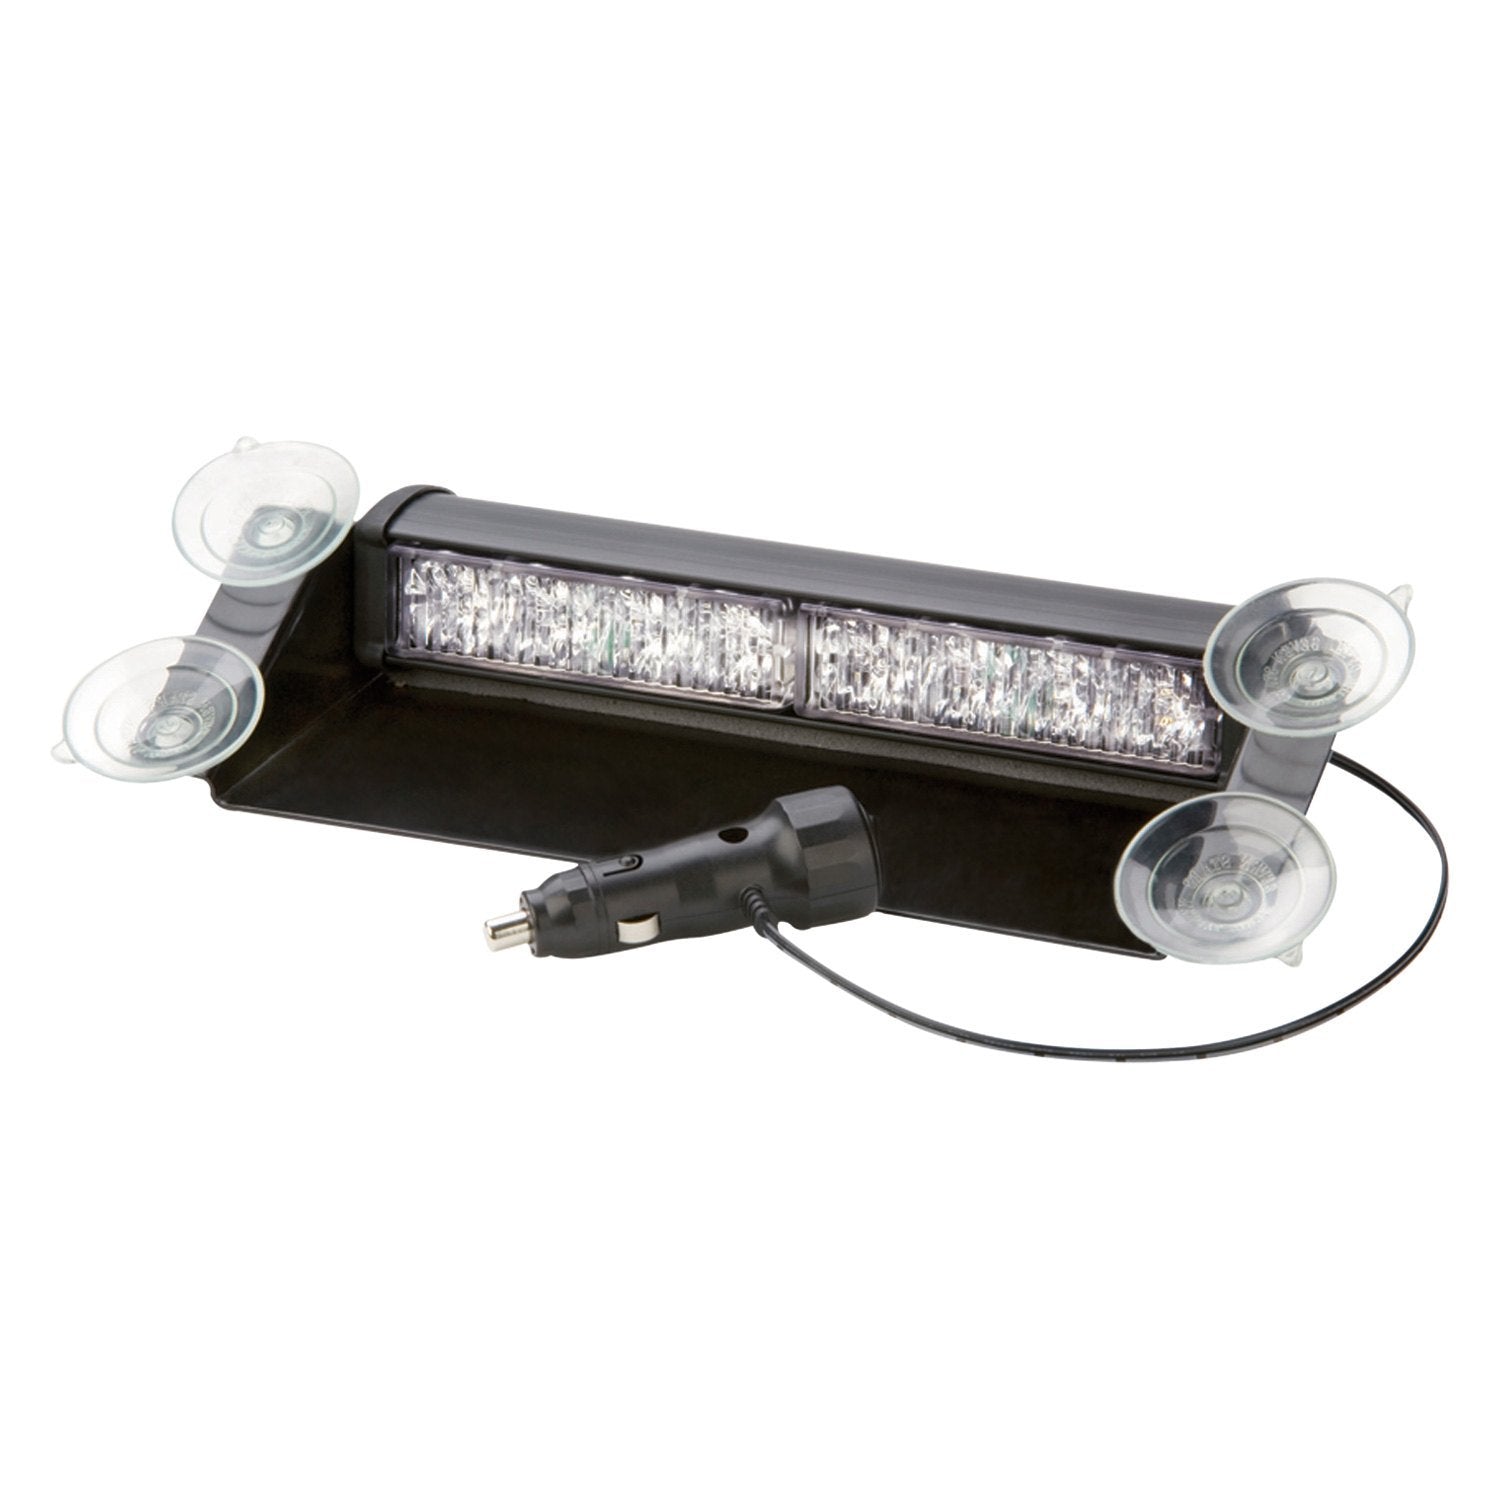 ECO 3612BB ECCO Directional 14 LED Dash Light (Switched, Blue/Blue, Suction or 2 Bolt)